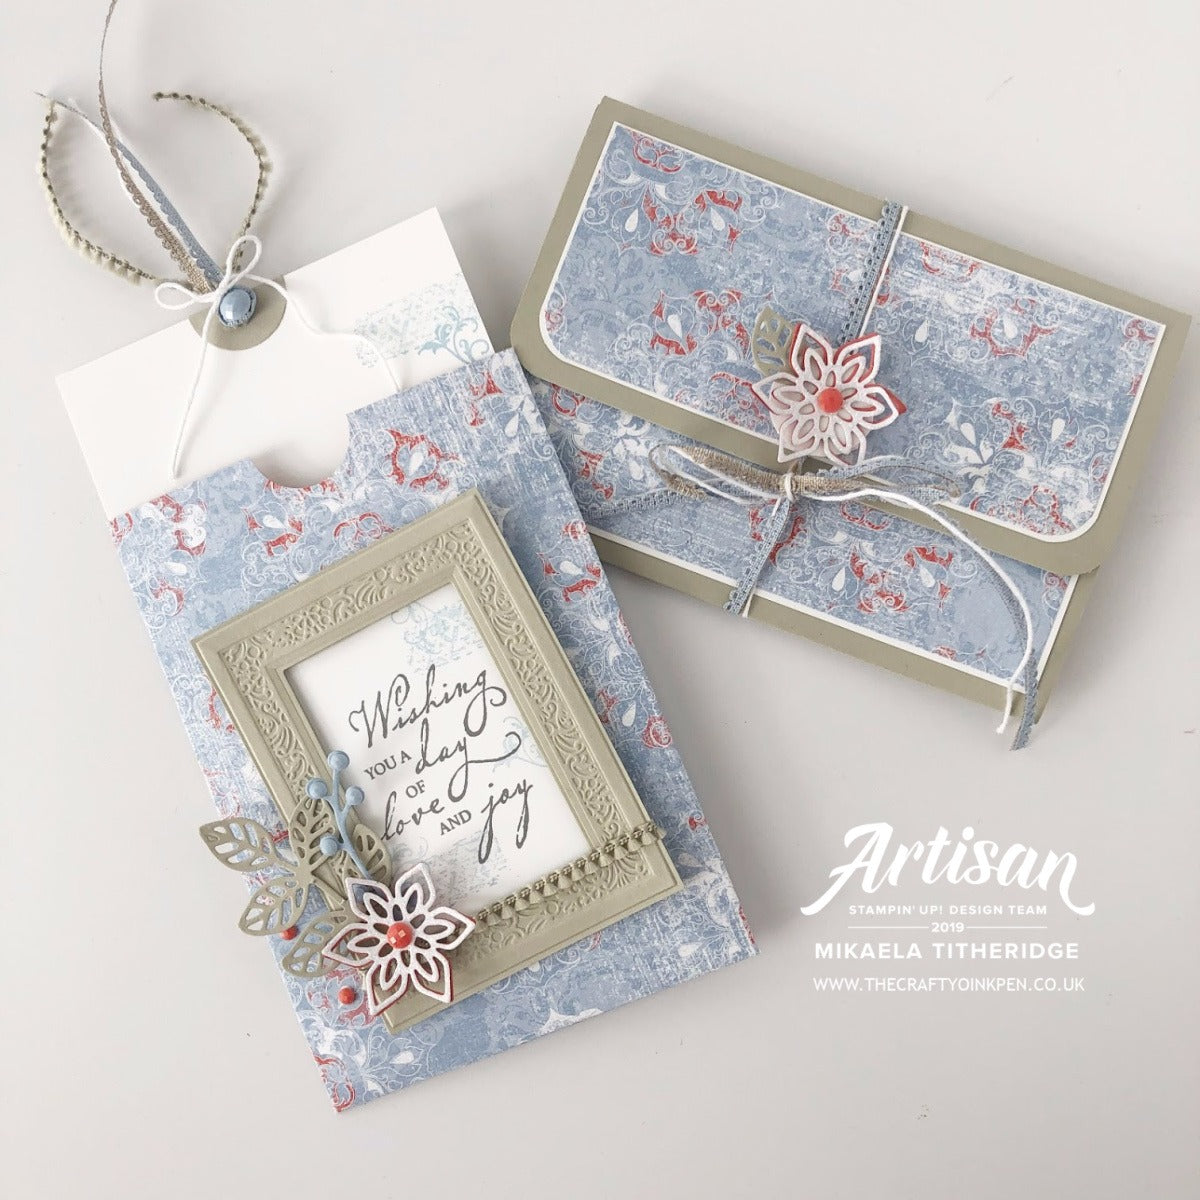 Stampin' Up! Woven Threads DSP